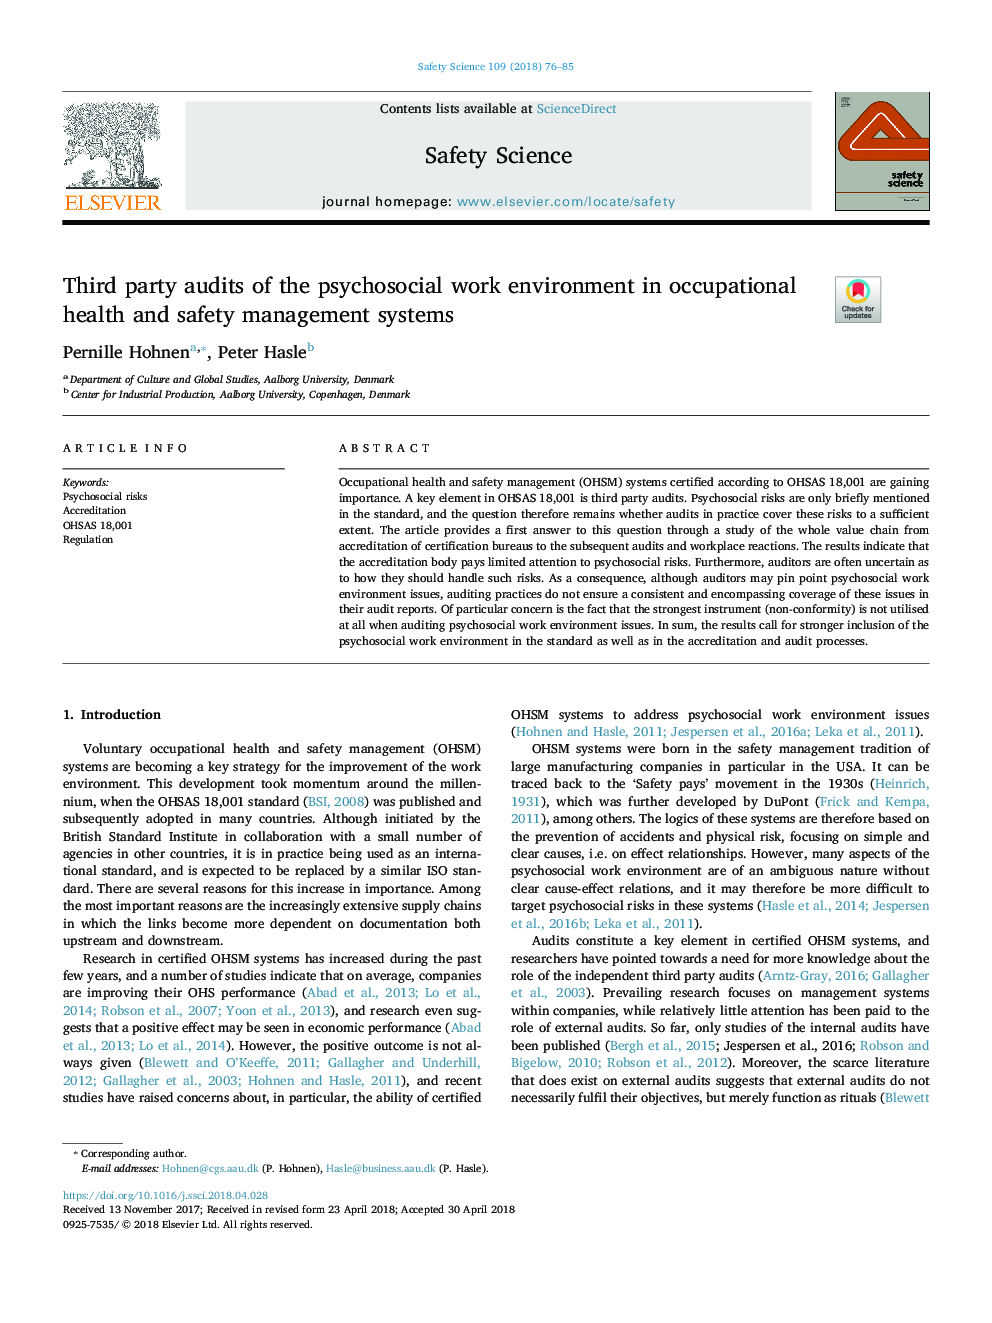 Third party audits of the psychosocial work environment in occupational health and safety management systems